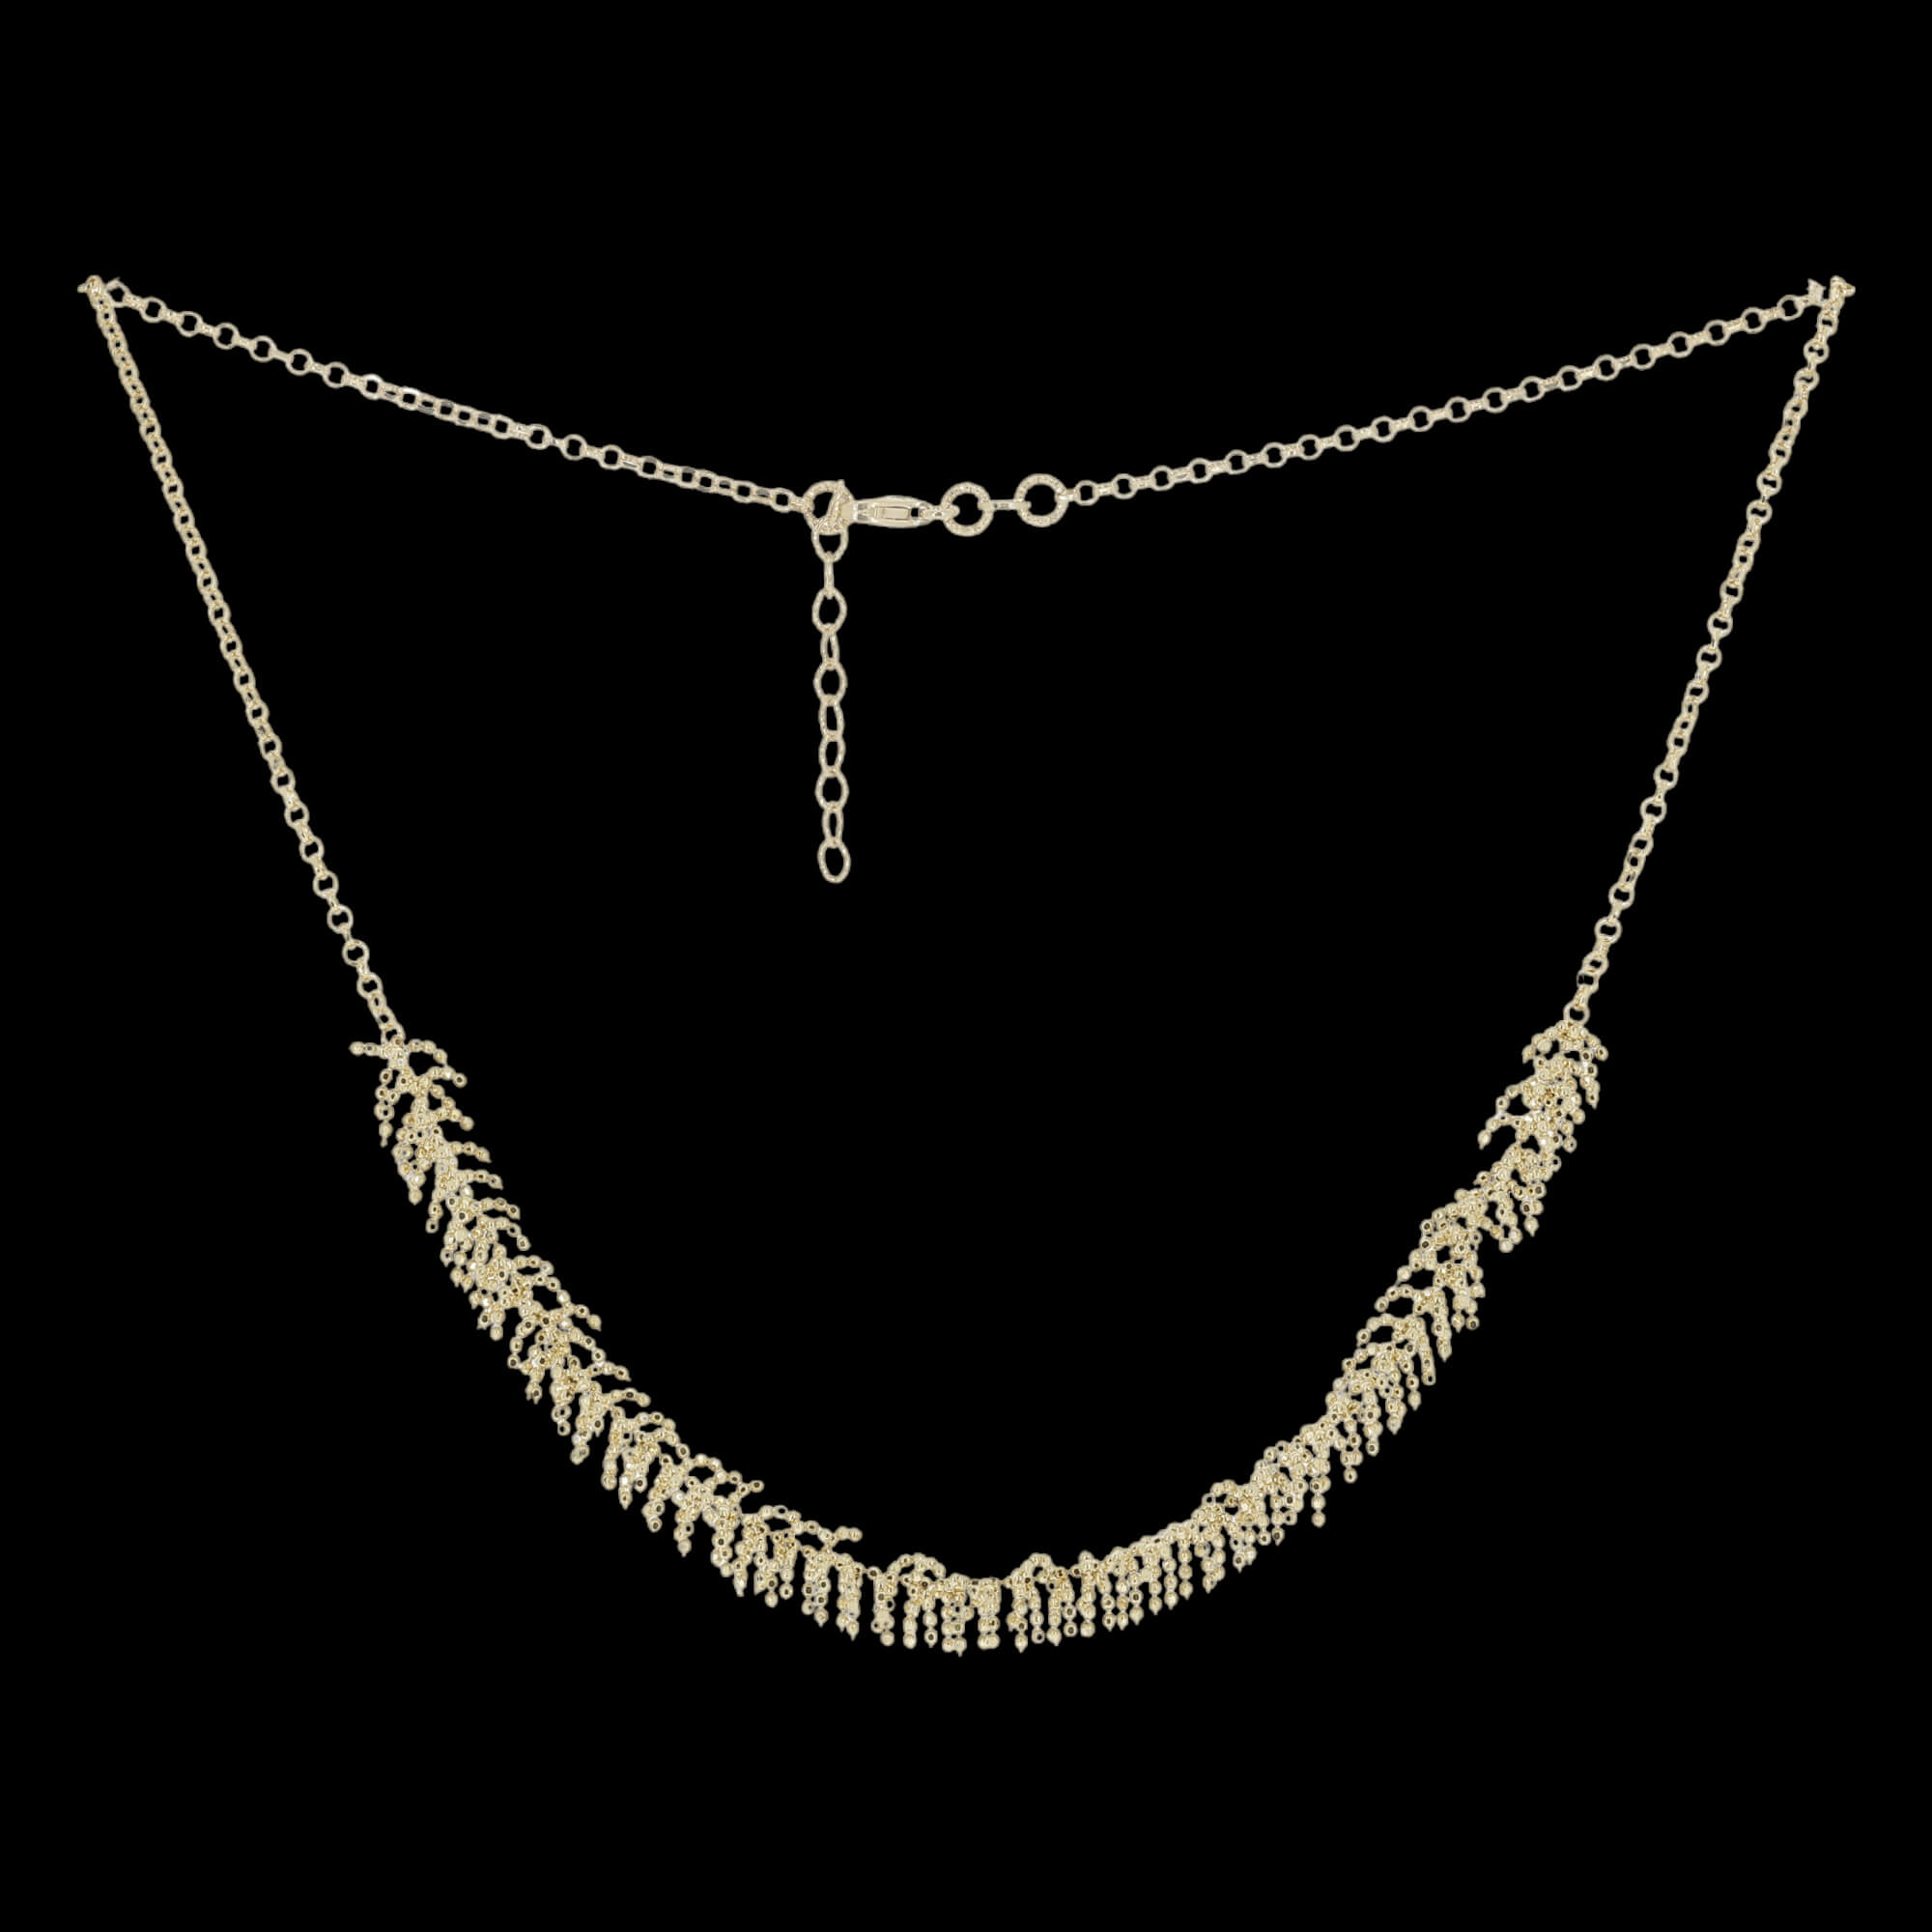 Chic round necklace with refined branches of 18kt gold